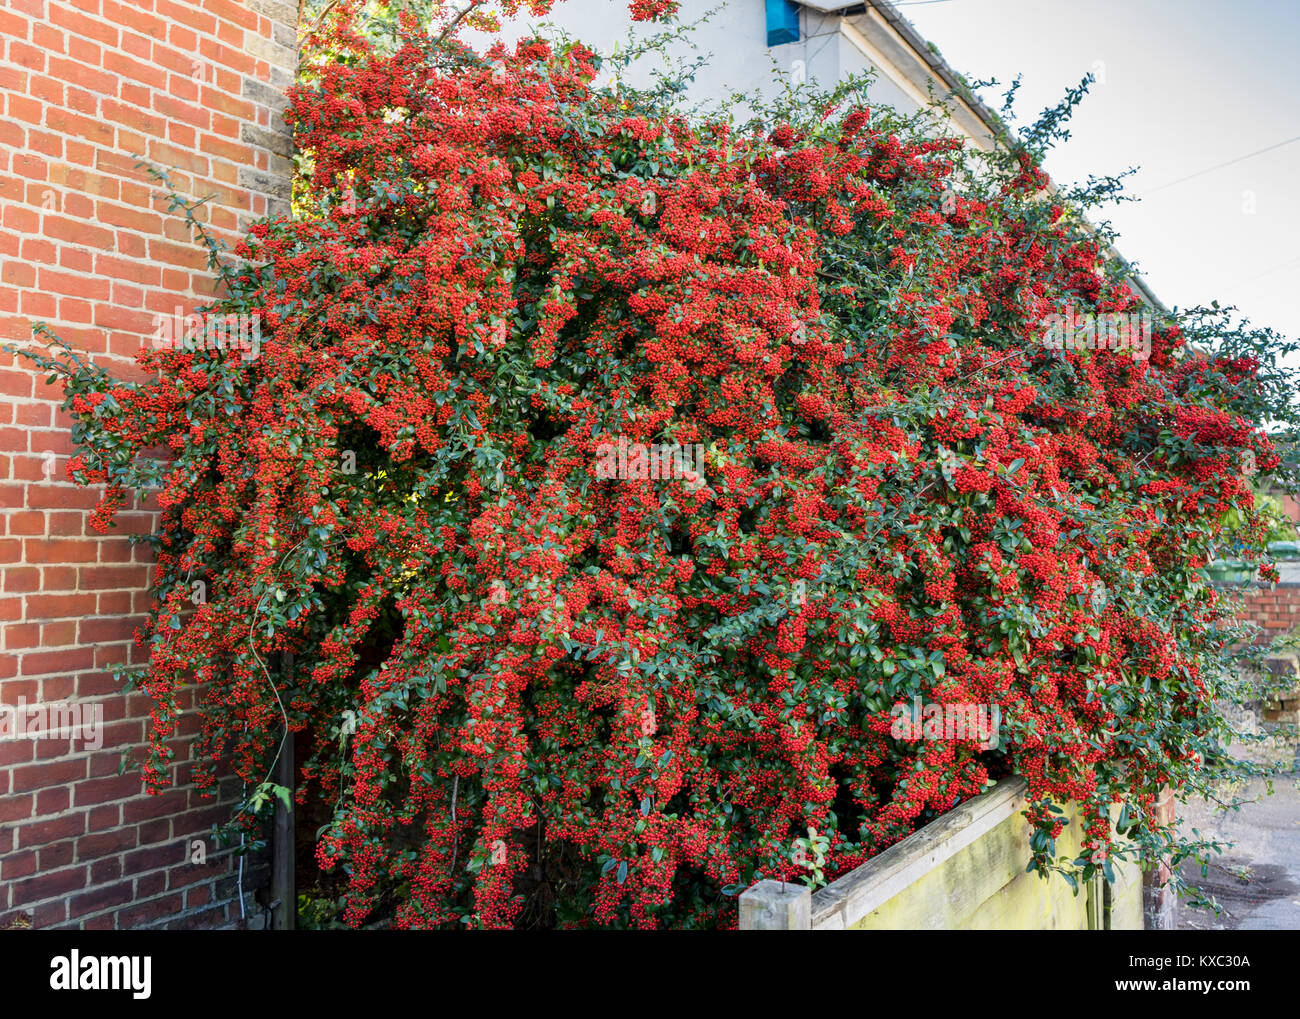 Bright red berries on a Firethorn plant (Pyracantha coccinea), garden shrub in December, England, UK Stock Photo